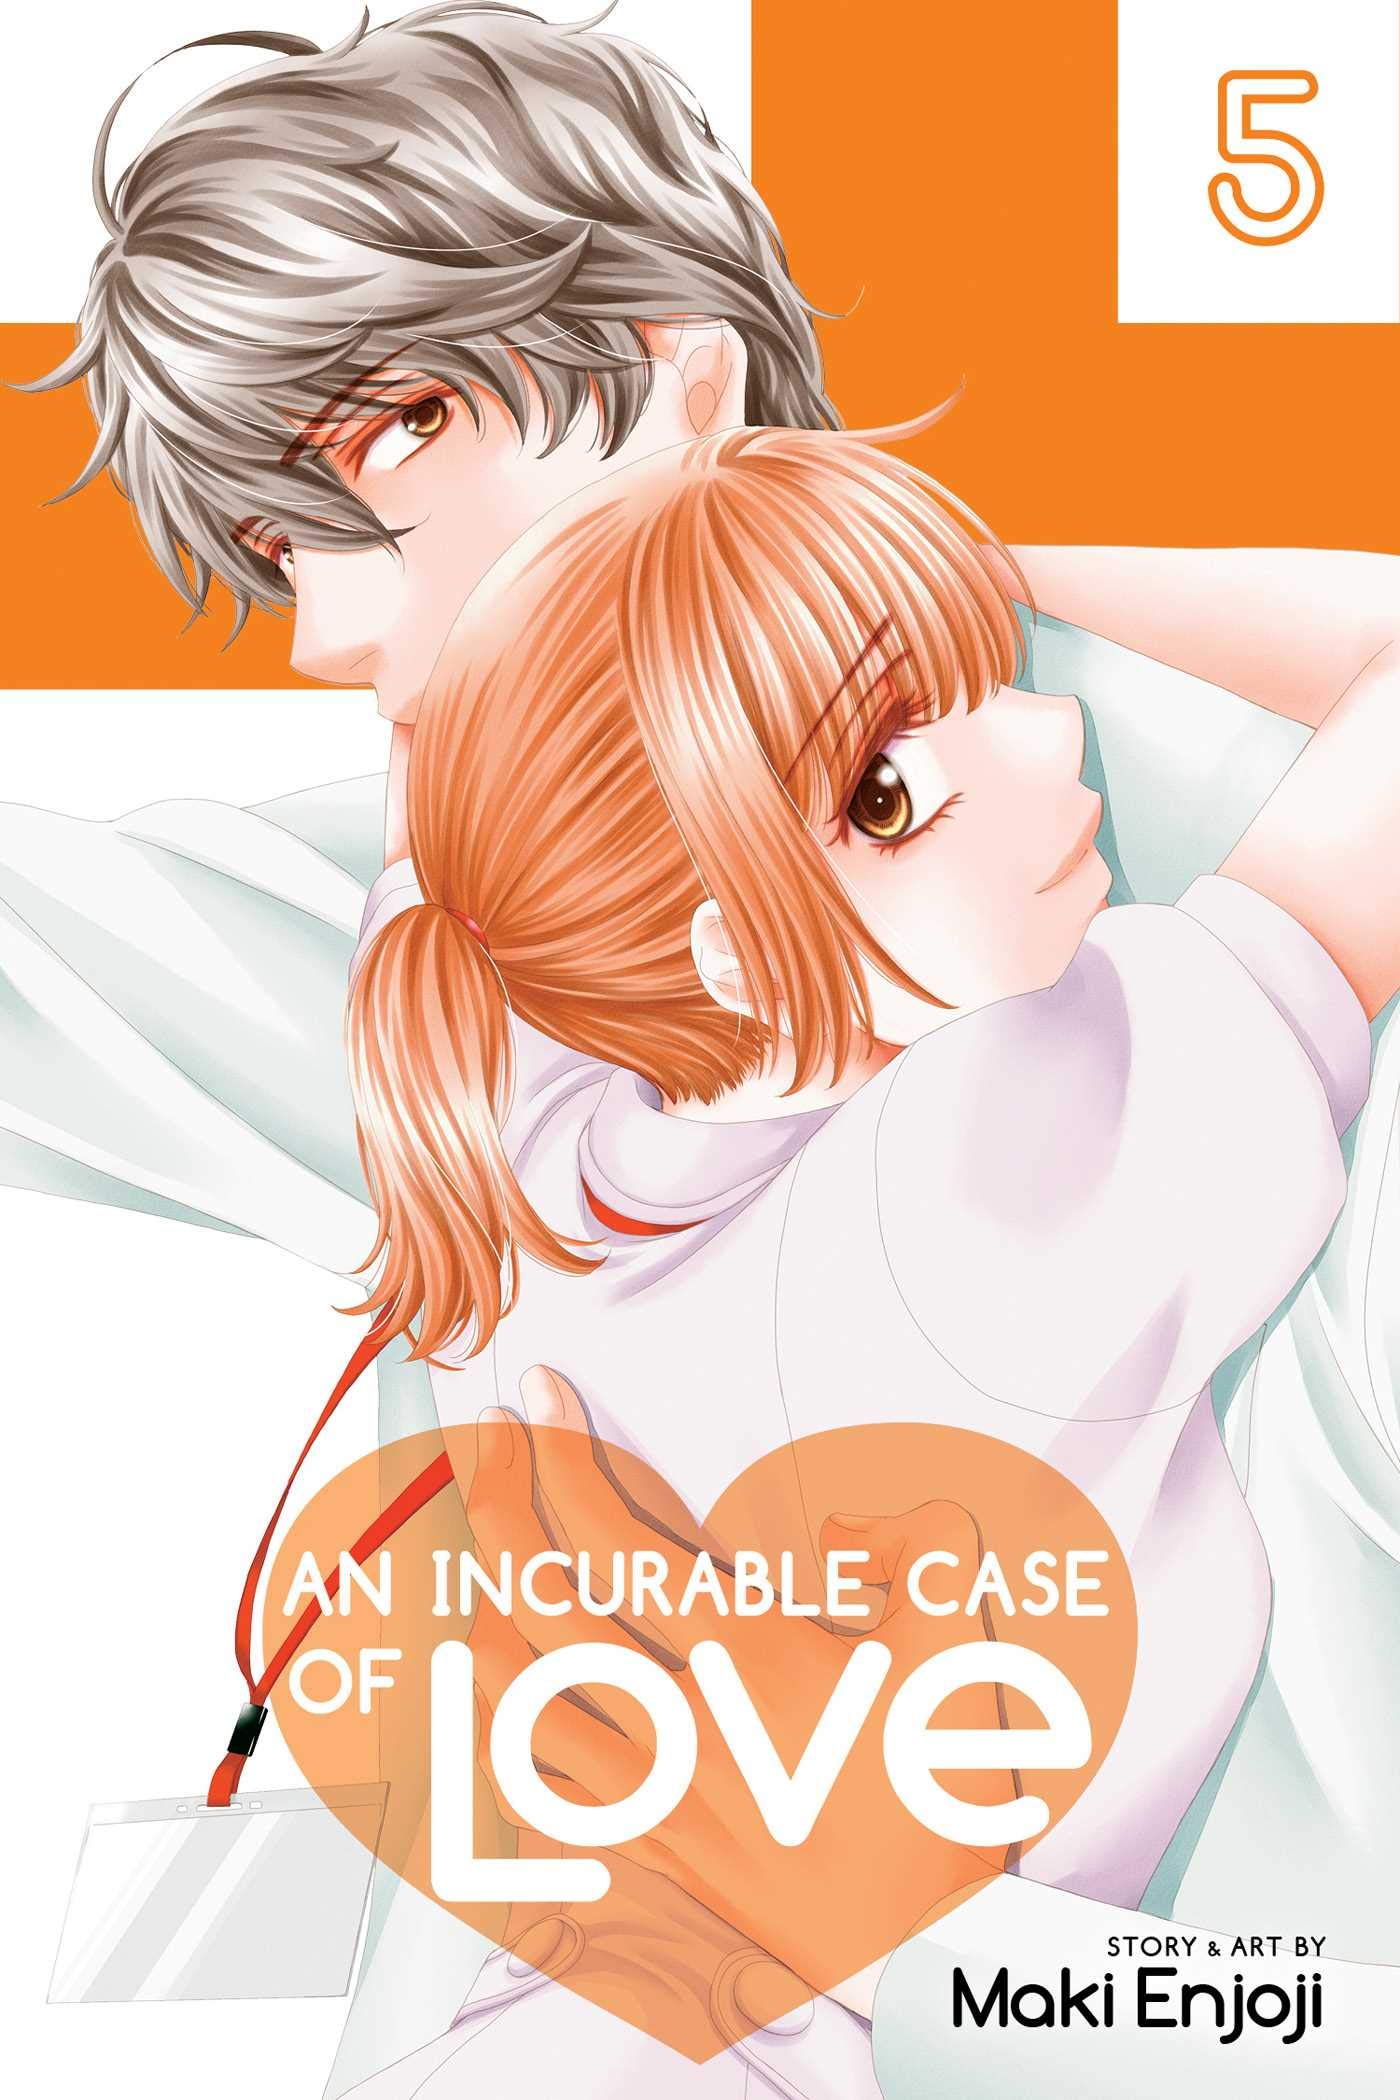 An Incurable Case of Love - Volume 5